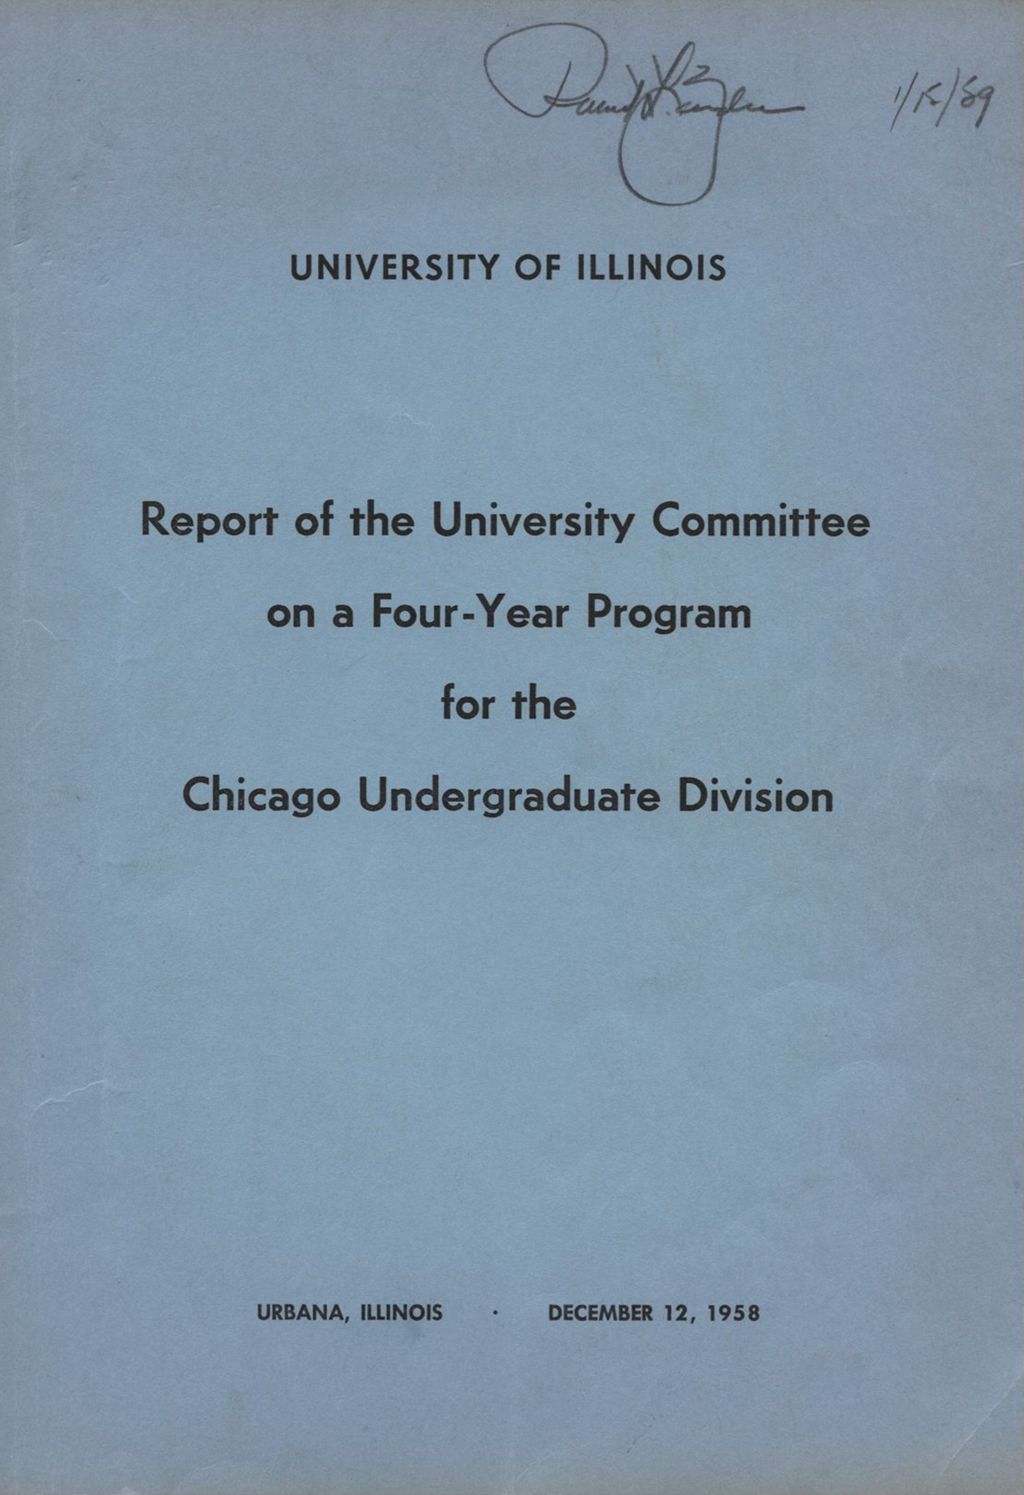 Report of the University Committee on a Four-Year Program for the Chicago Undergraduate Division. Urbana, Illinois